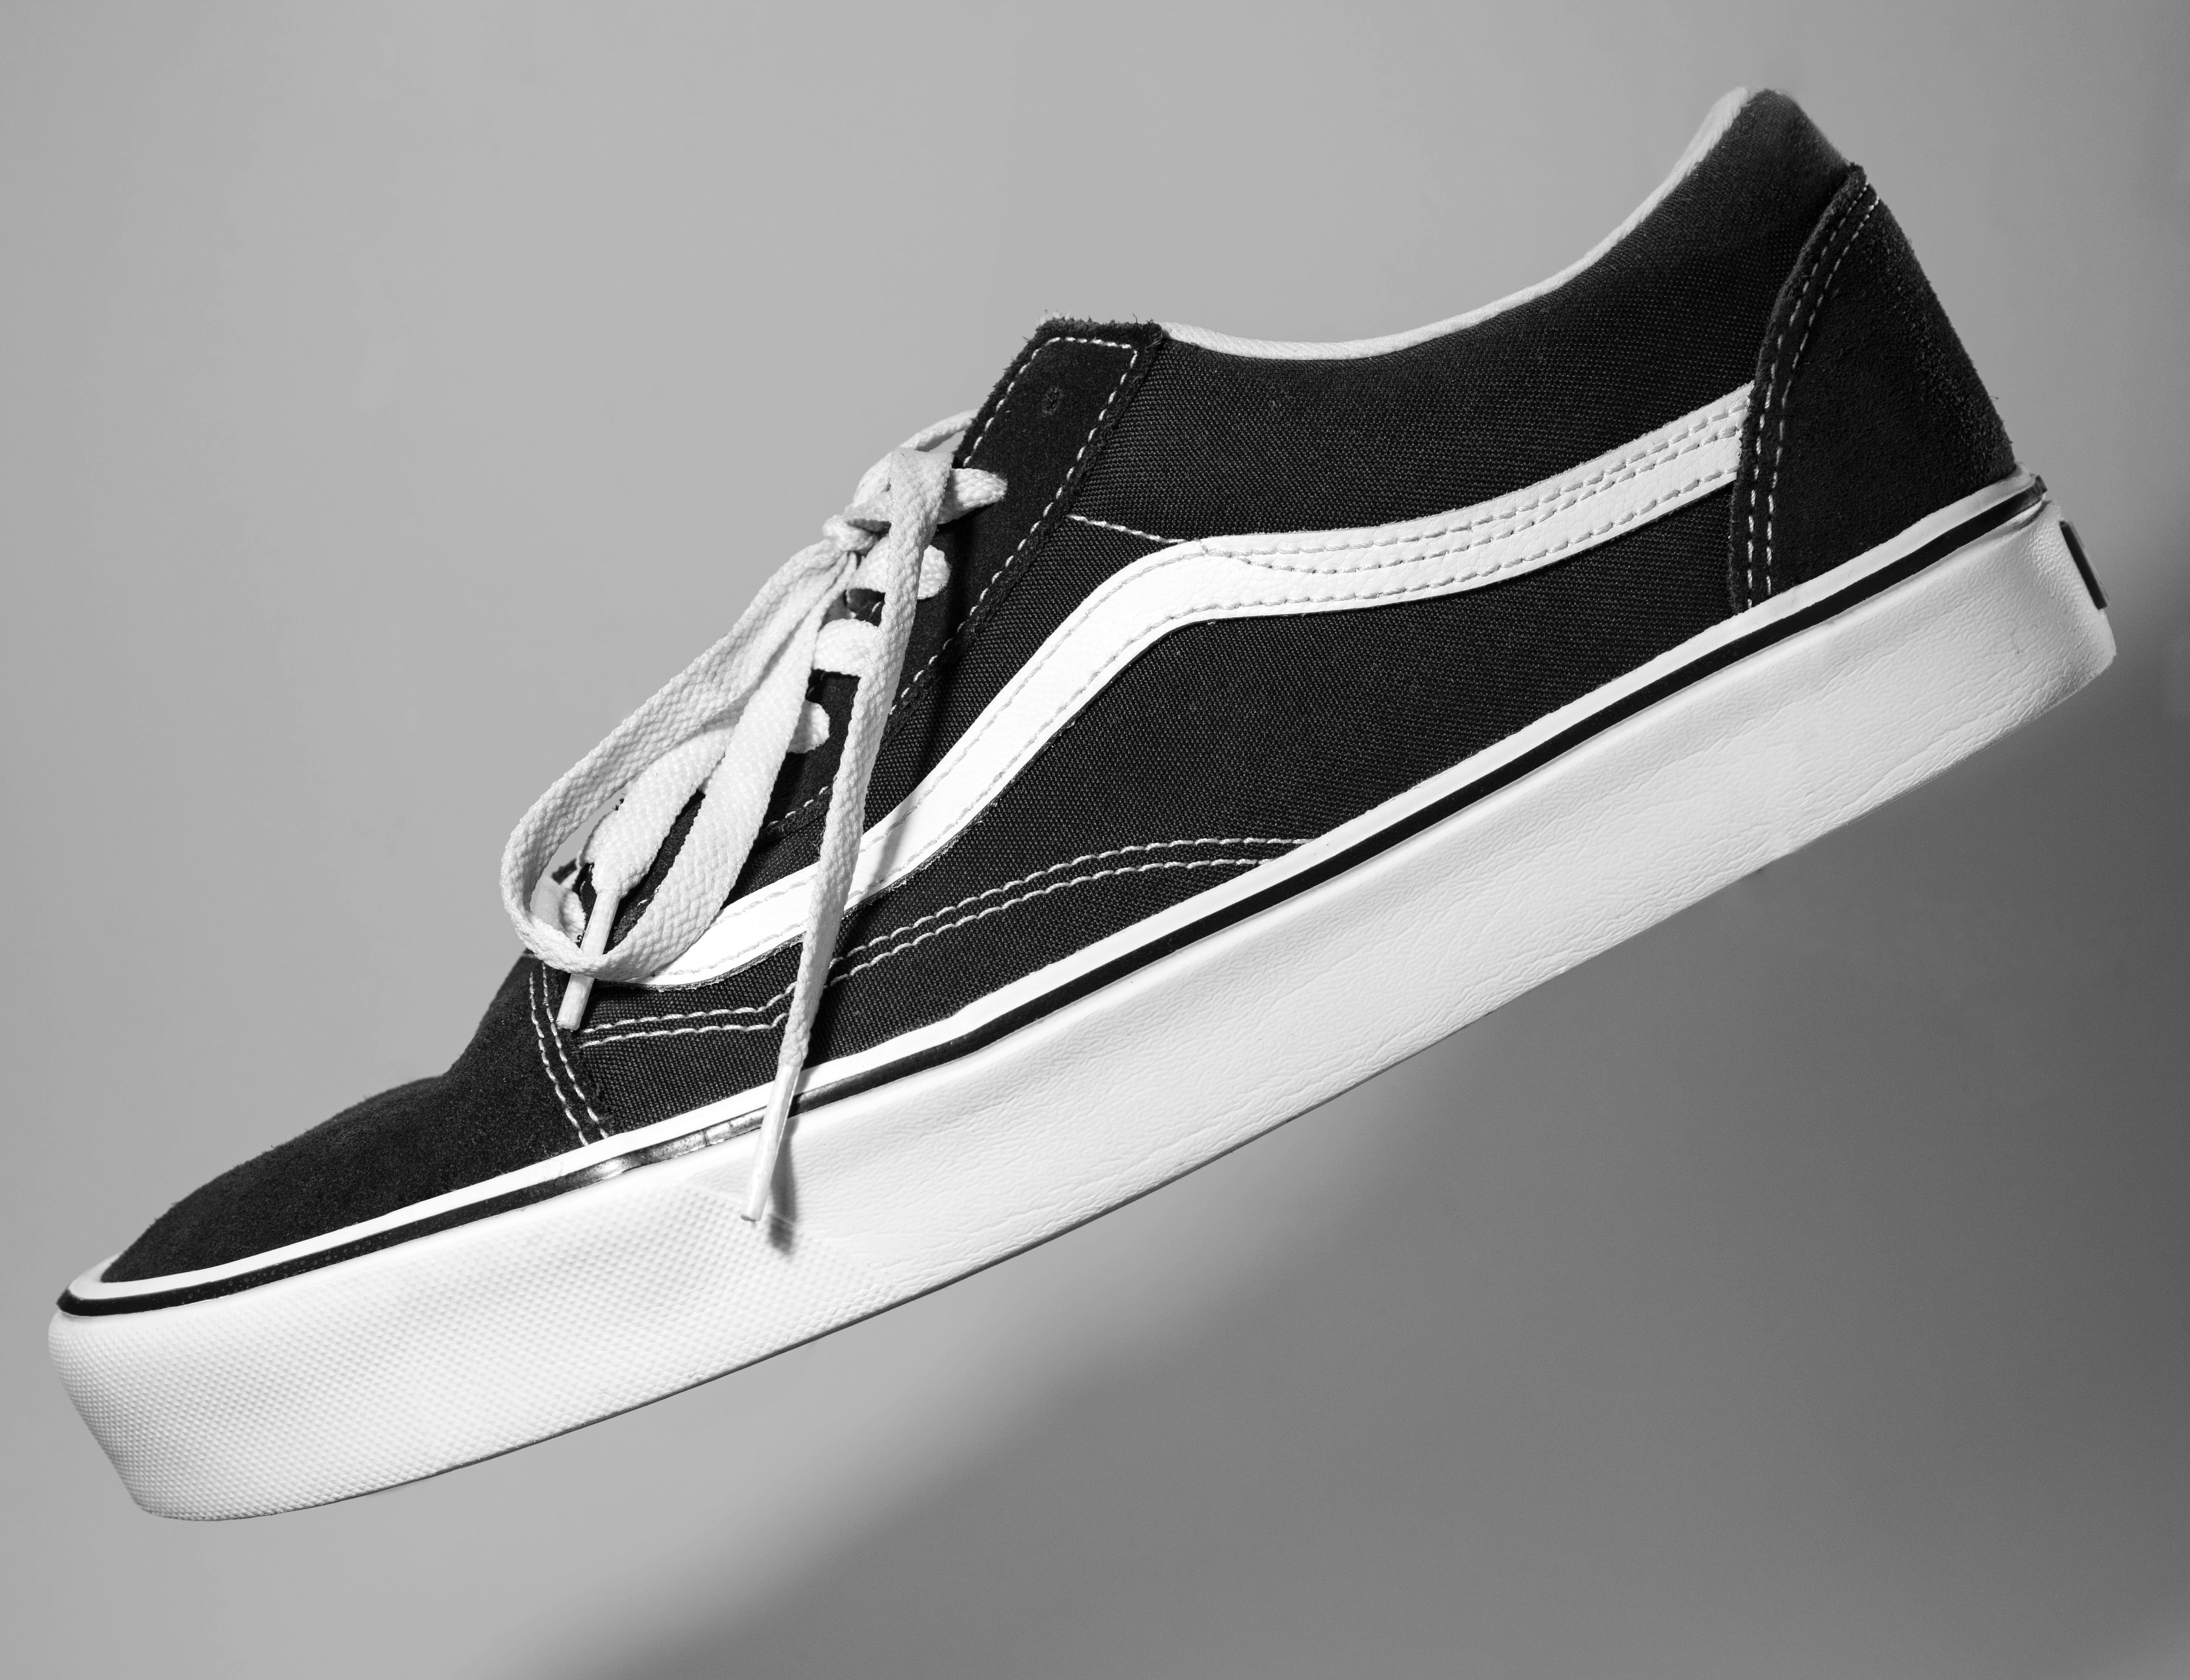 Vans and Walmart take a big step and reach settlement over lookalike shoes